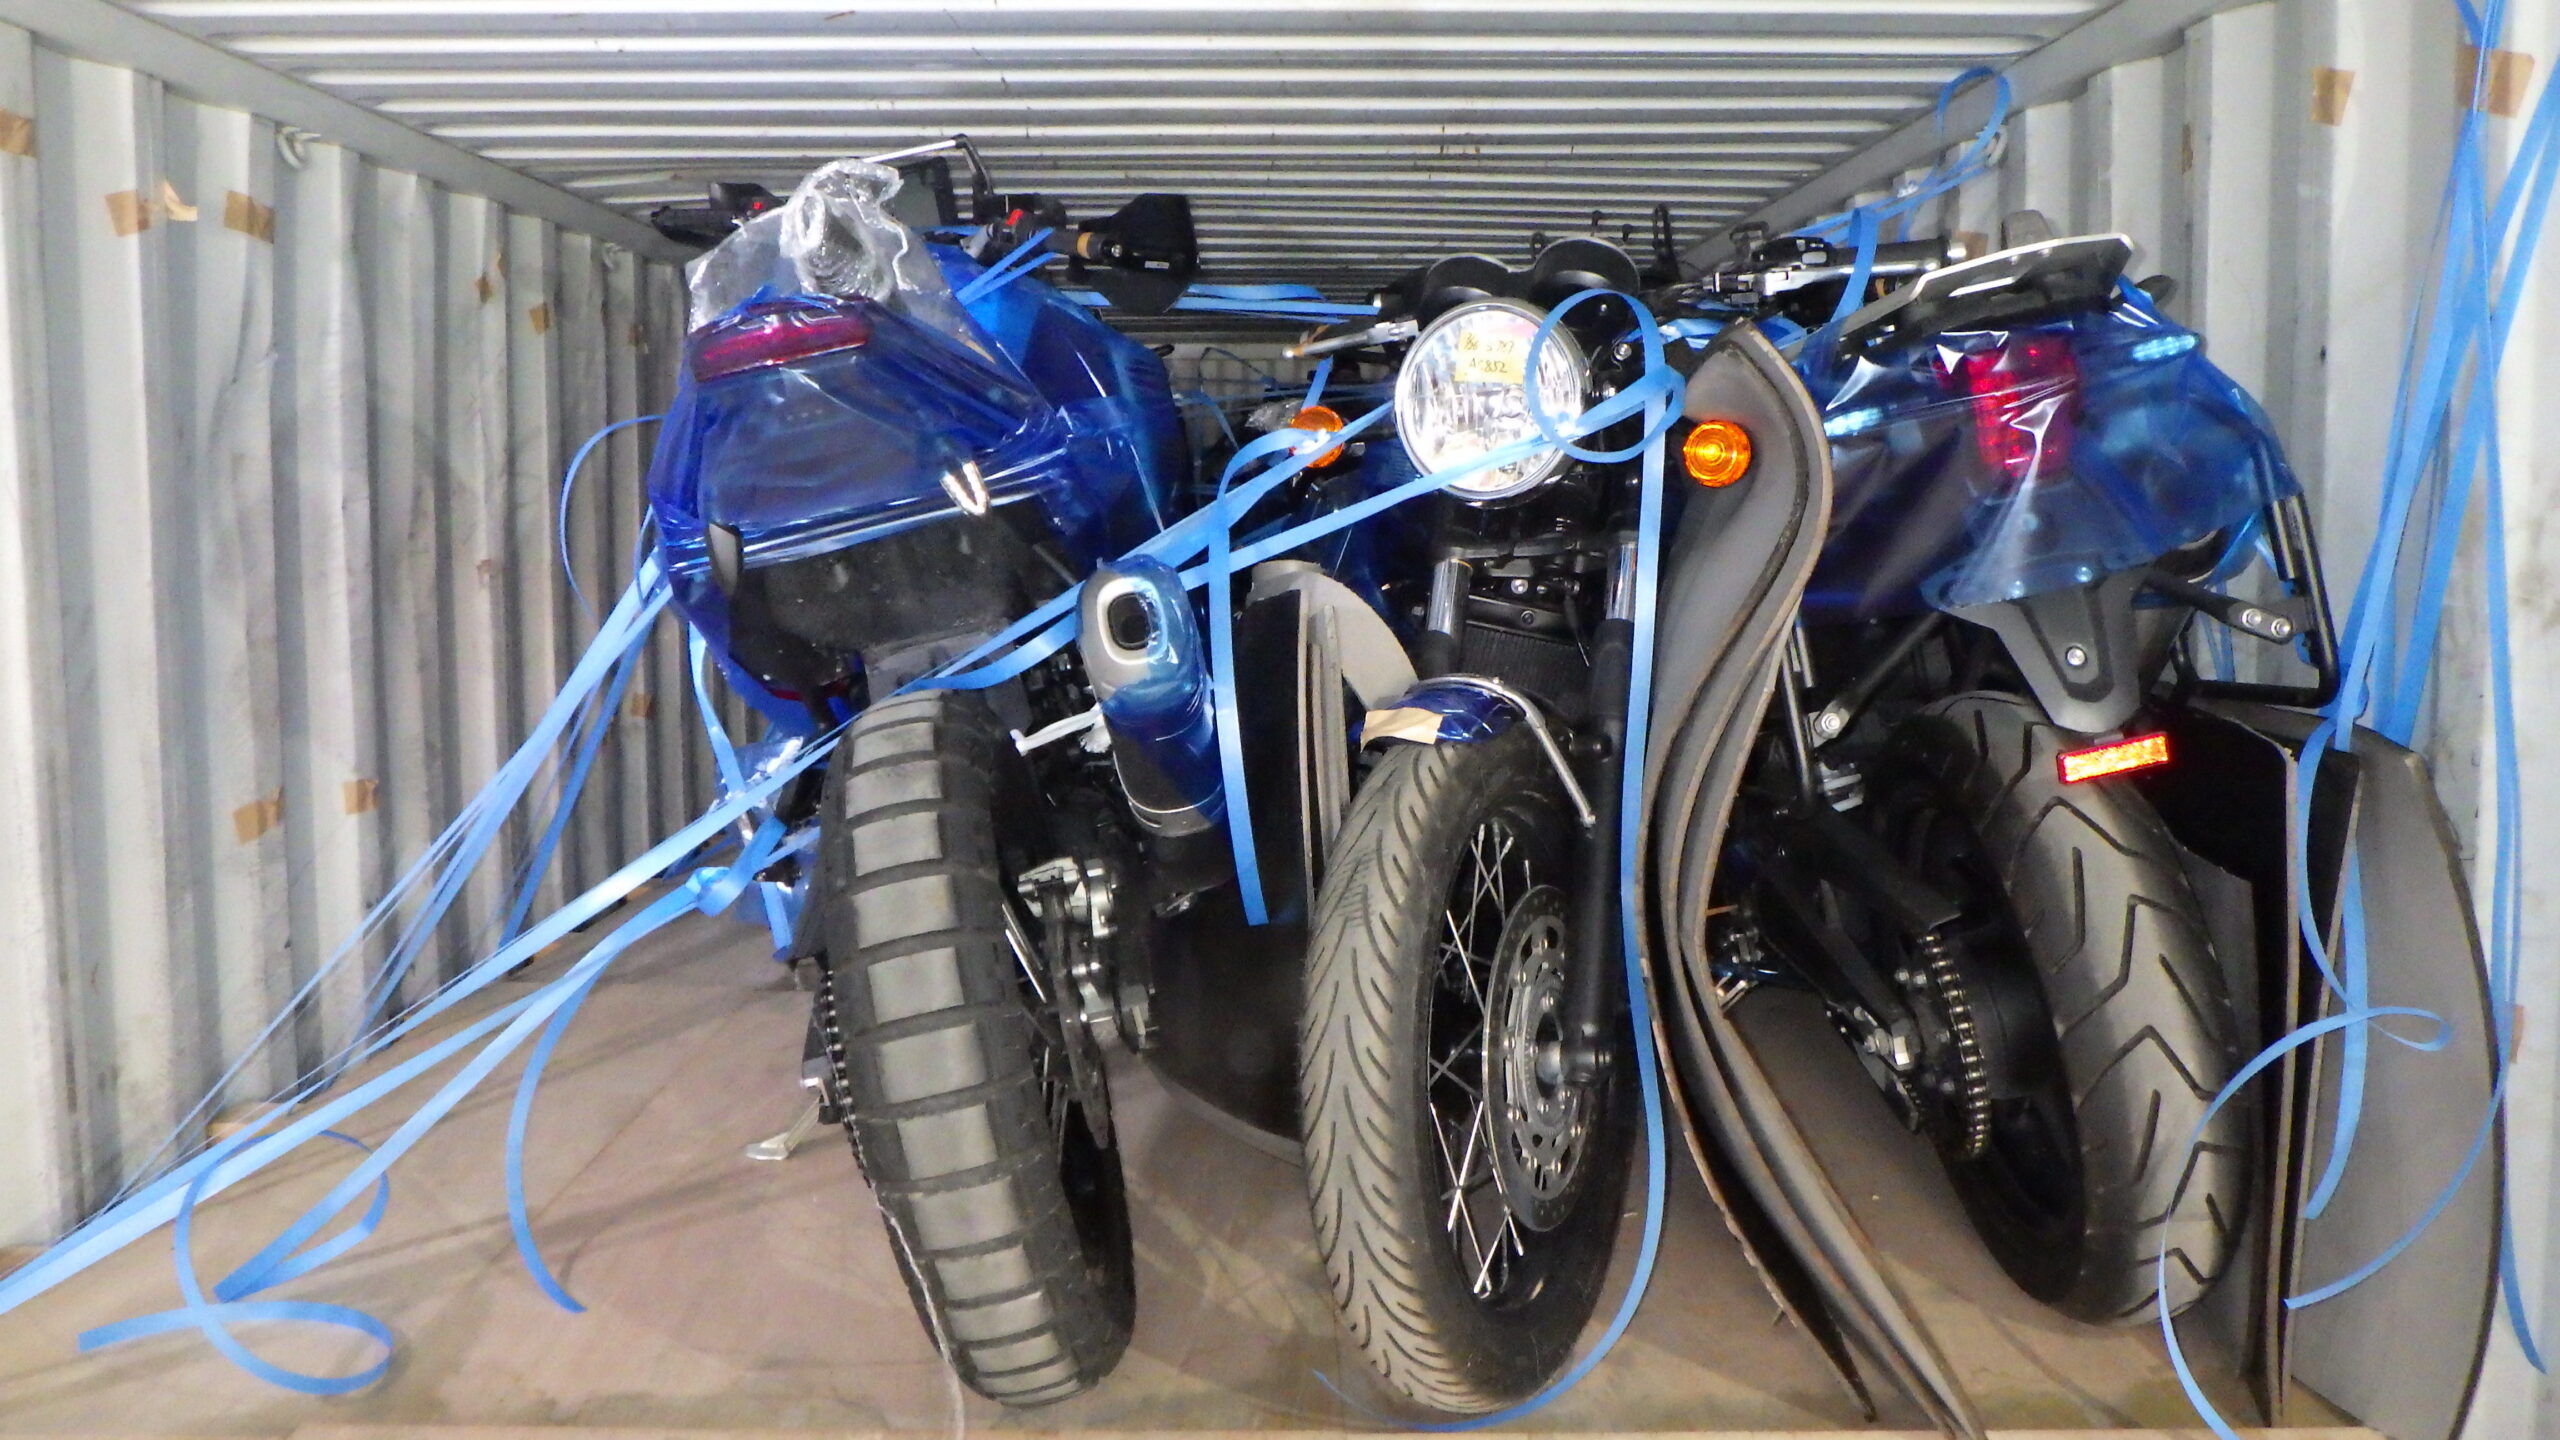 Shipping Example: 40FT Container with 27 Motorcycles!